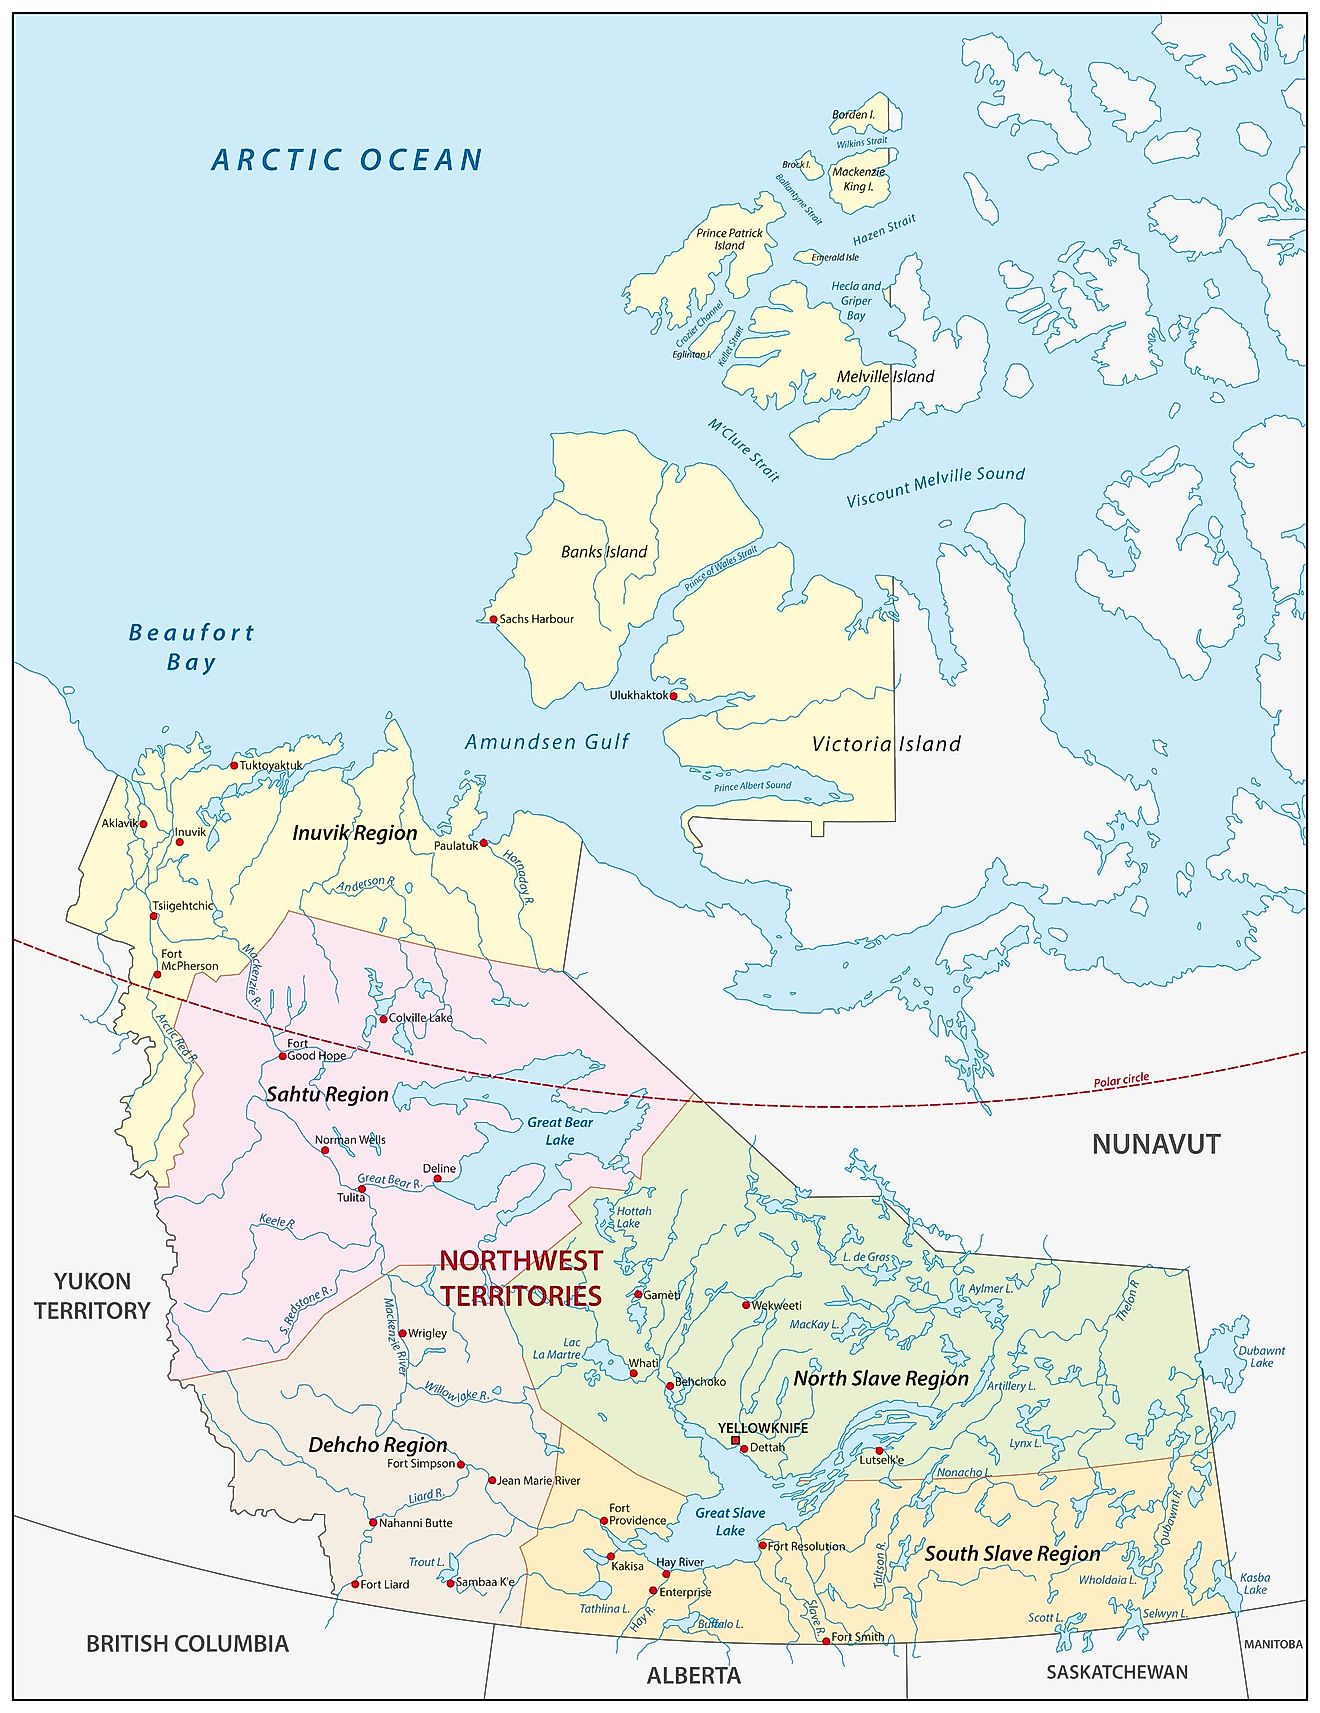 Administrative Map of Northwest Territories showing its administrative regions and the capital city - Yellowknife